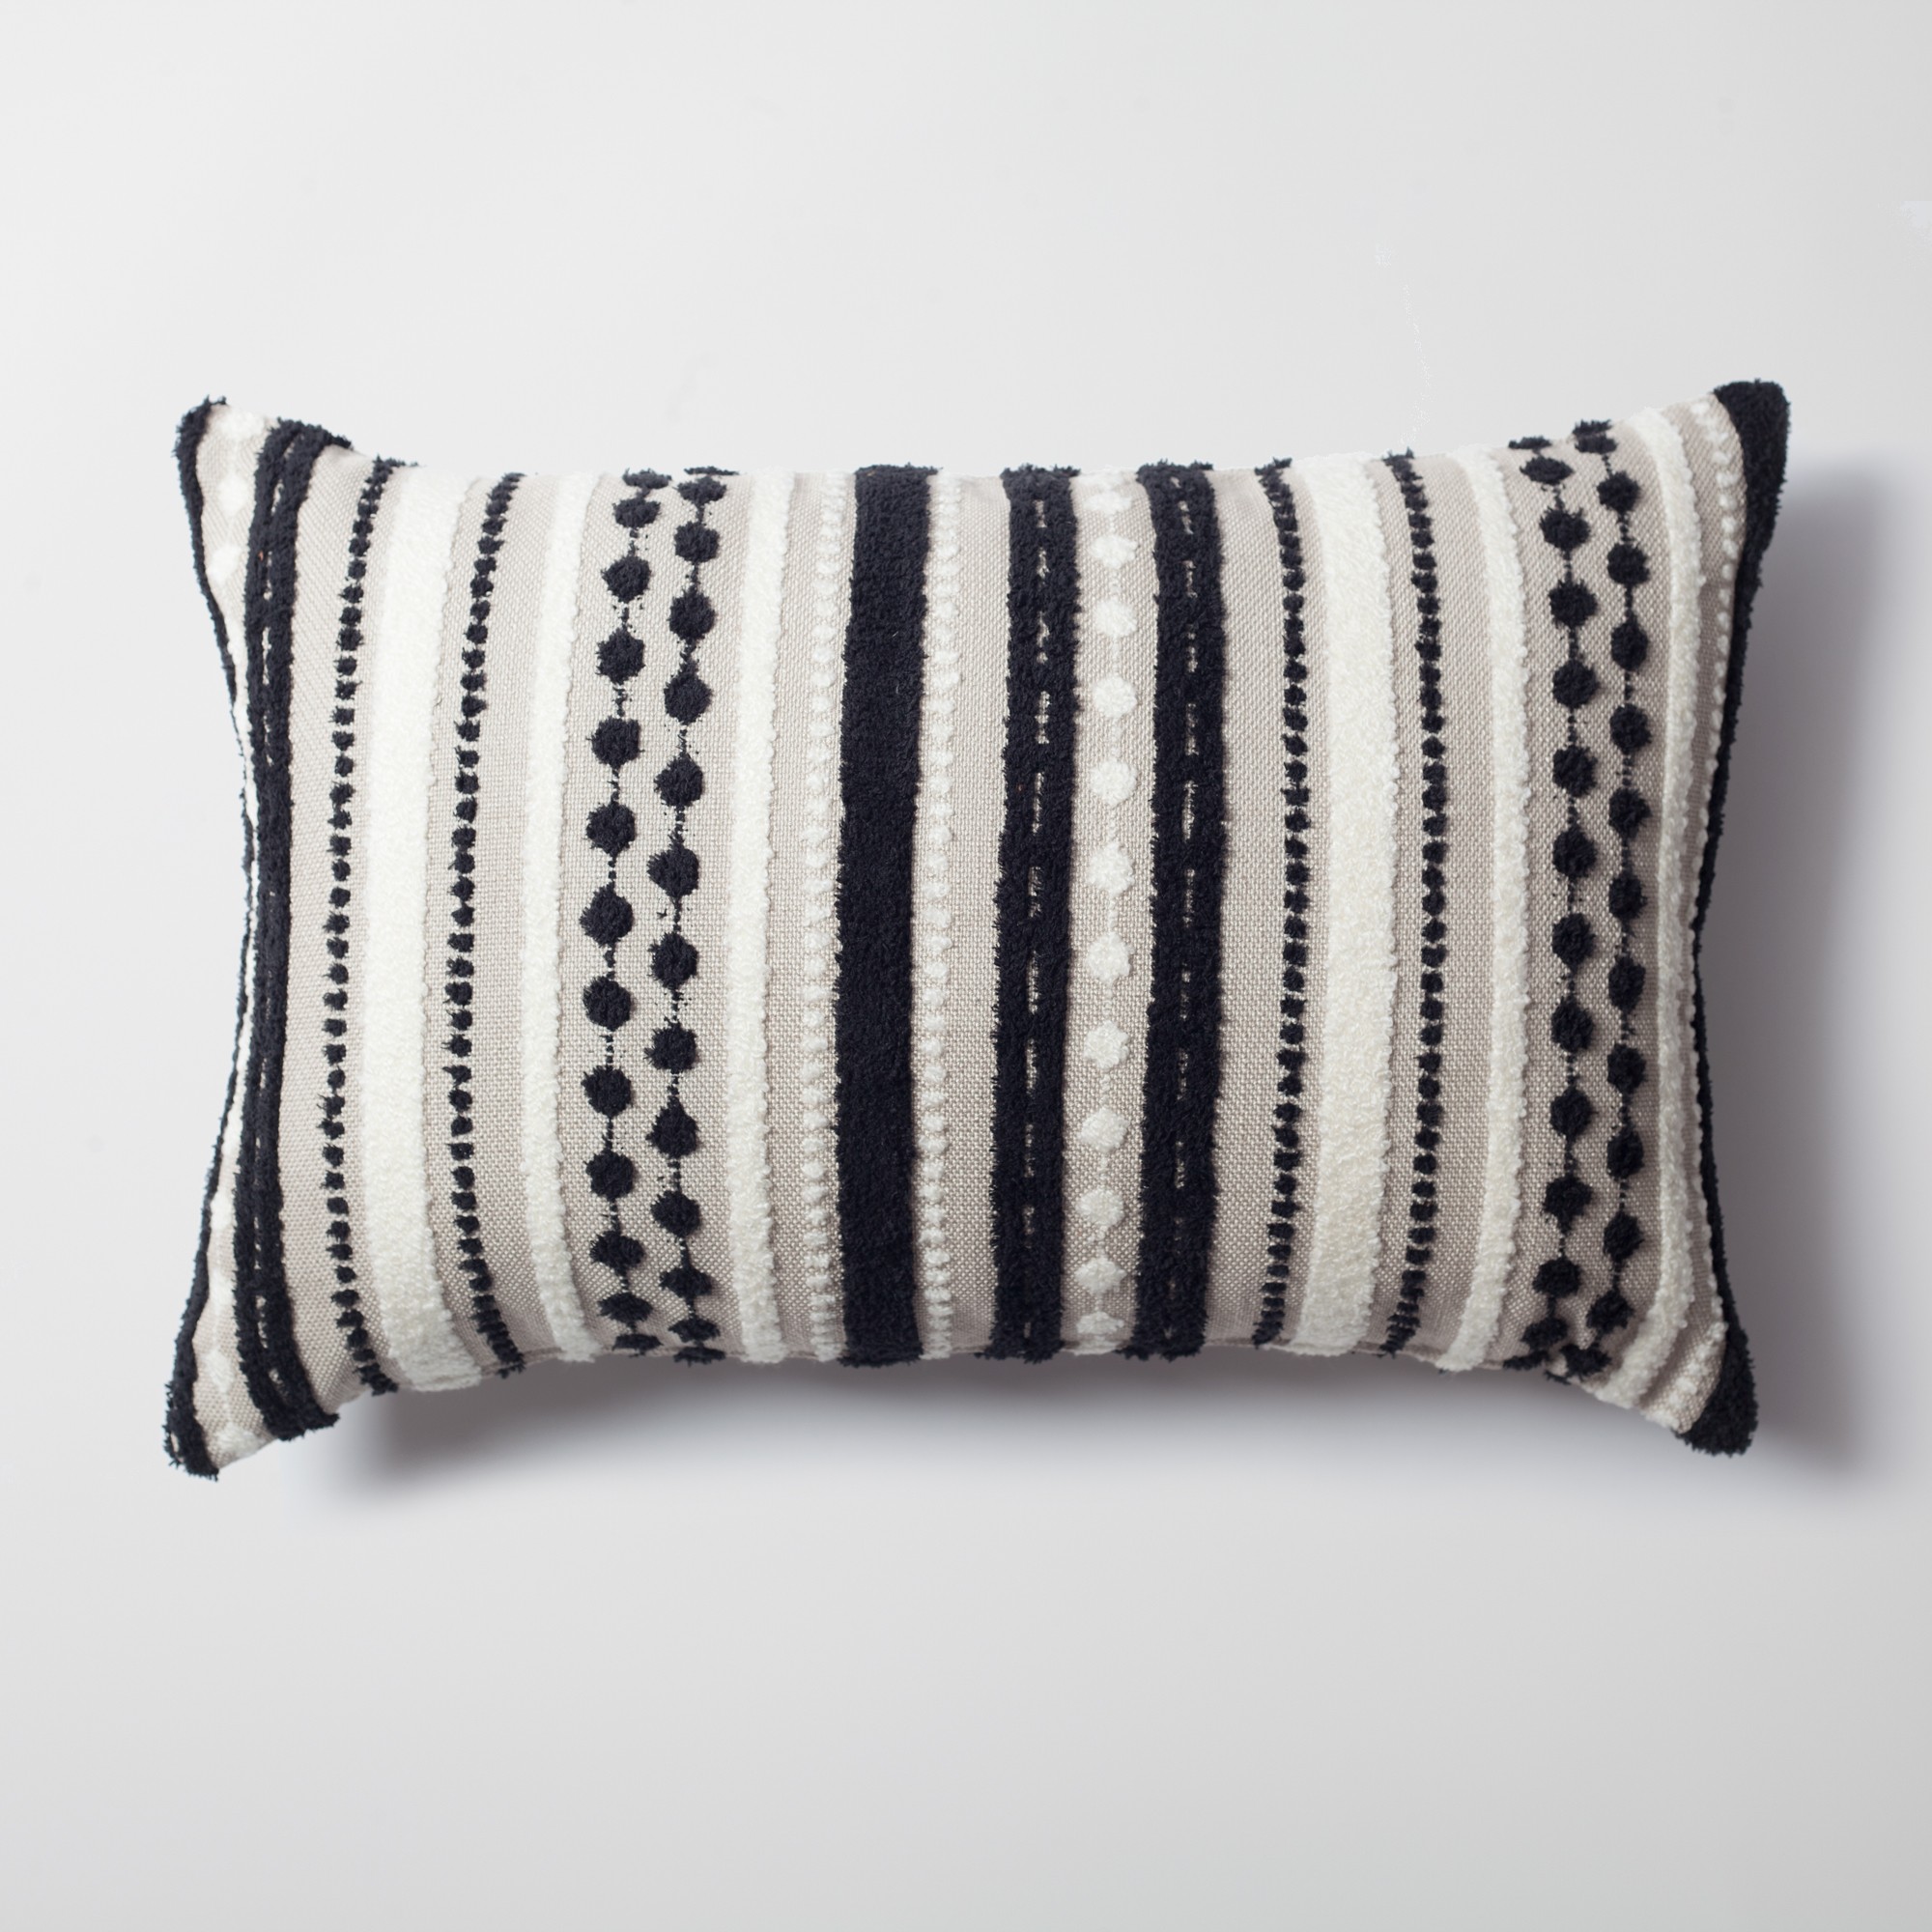 "Nomad" - Multicolored Striped Linen Decorative Pillow 16x24 Inch - Black & White (Cover Only)